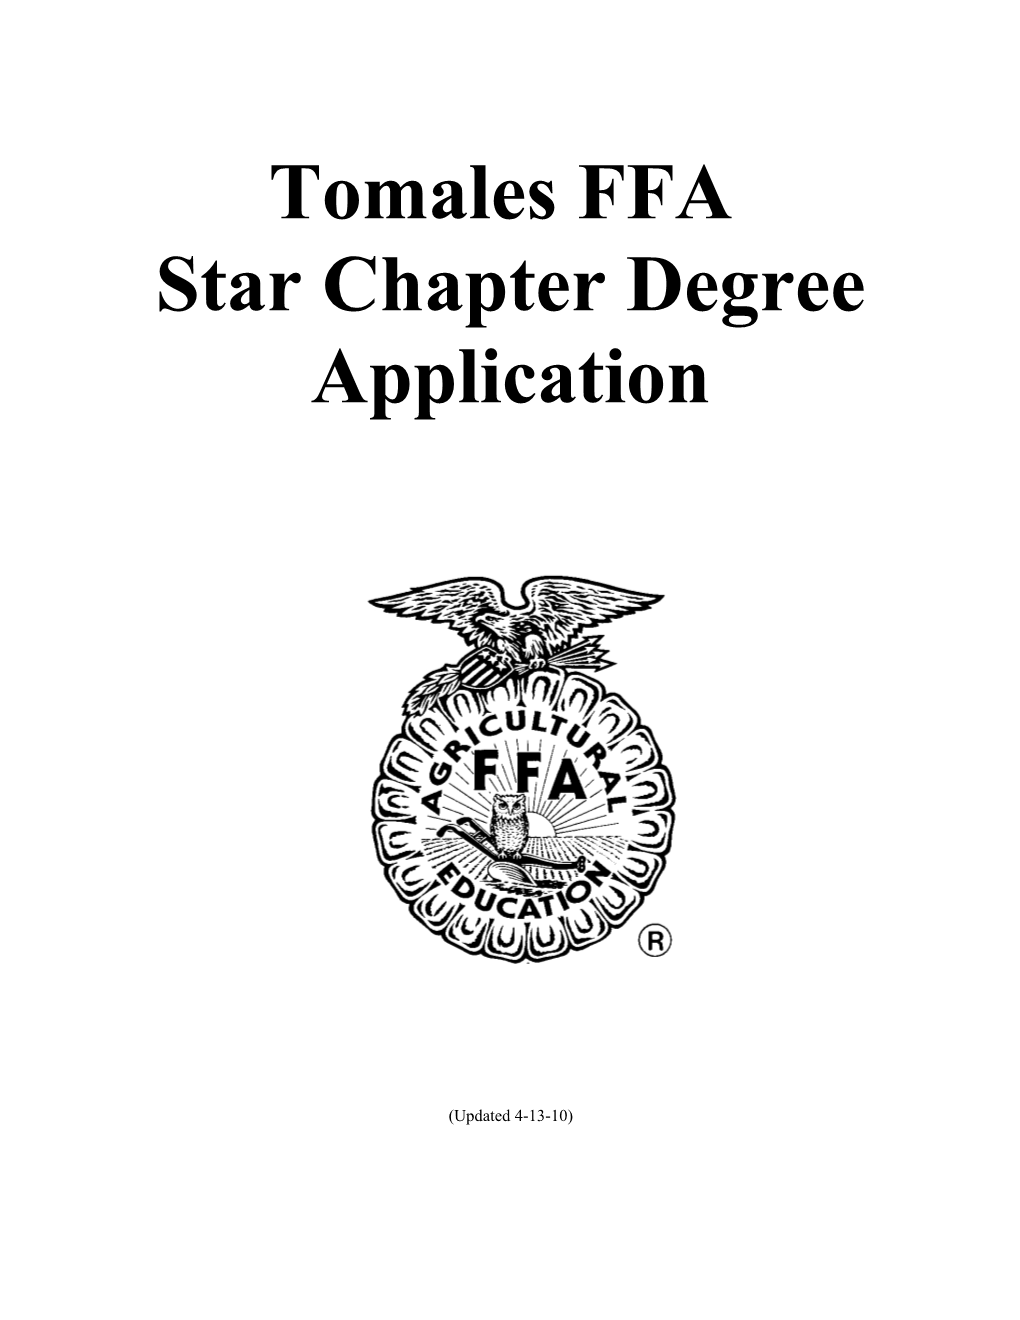 Tomales FFA Star Chapter Degree